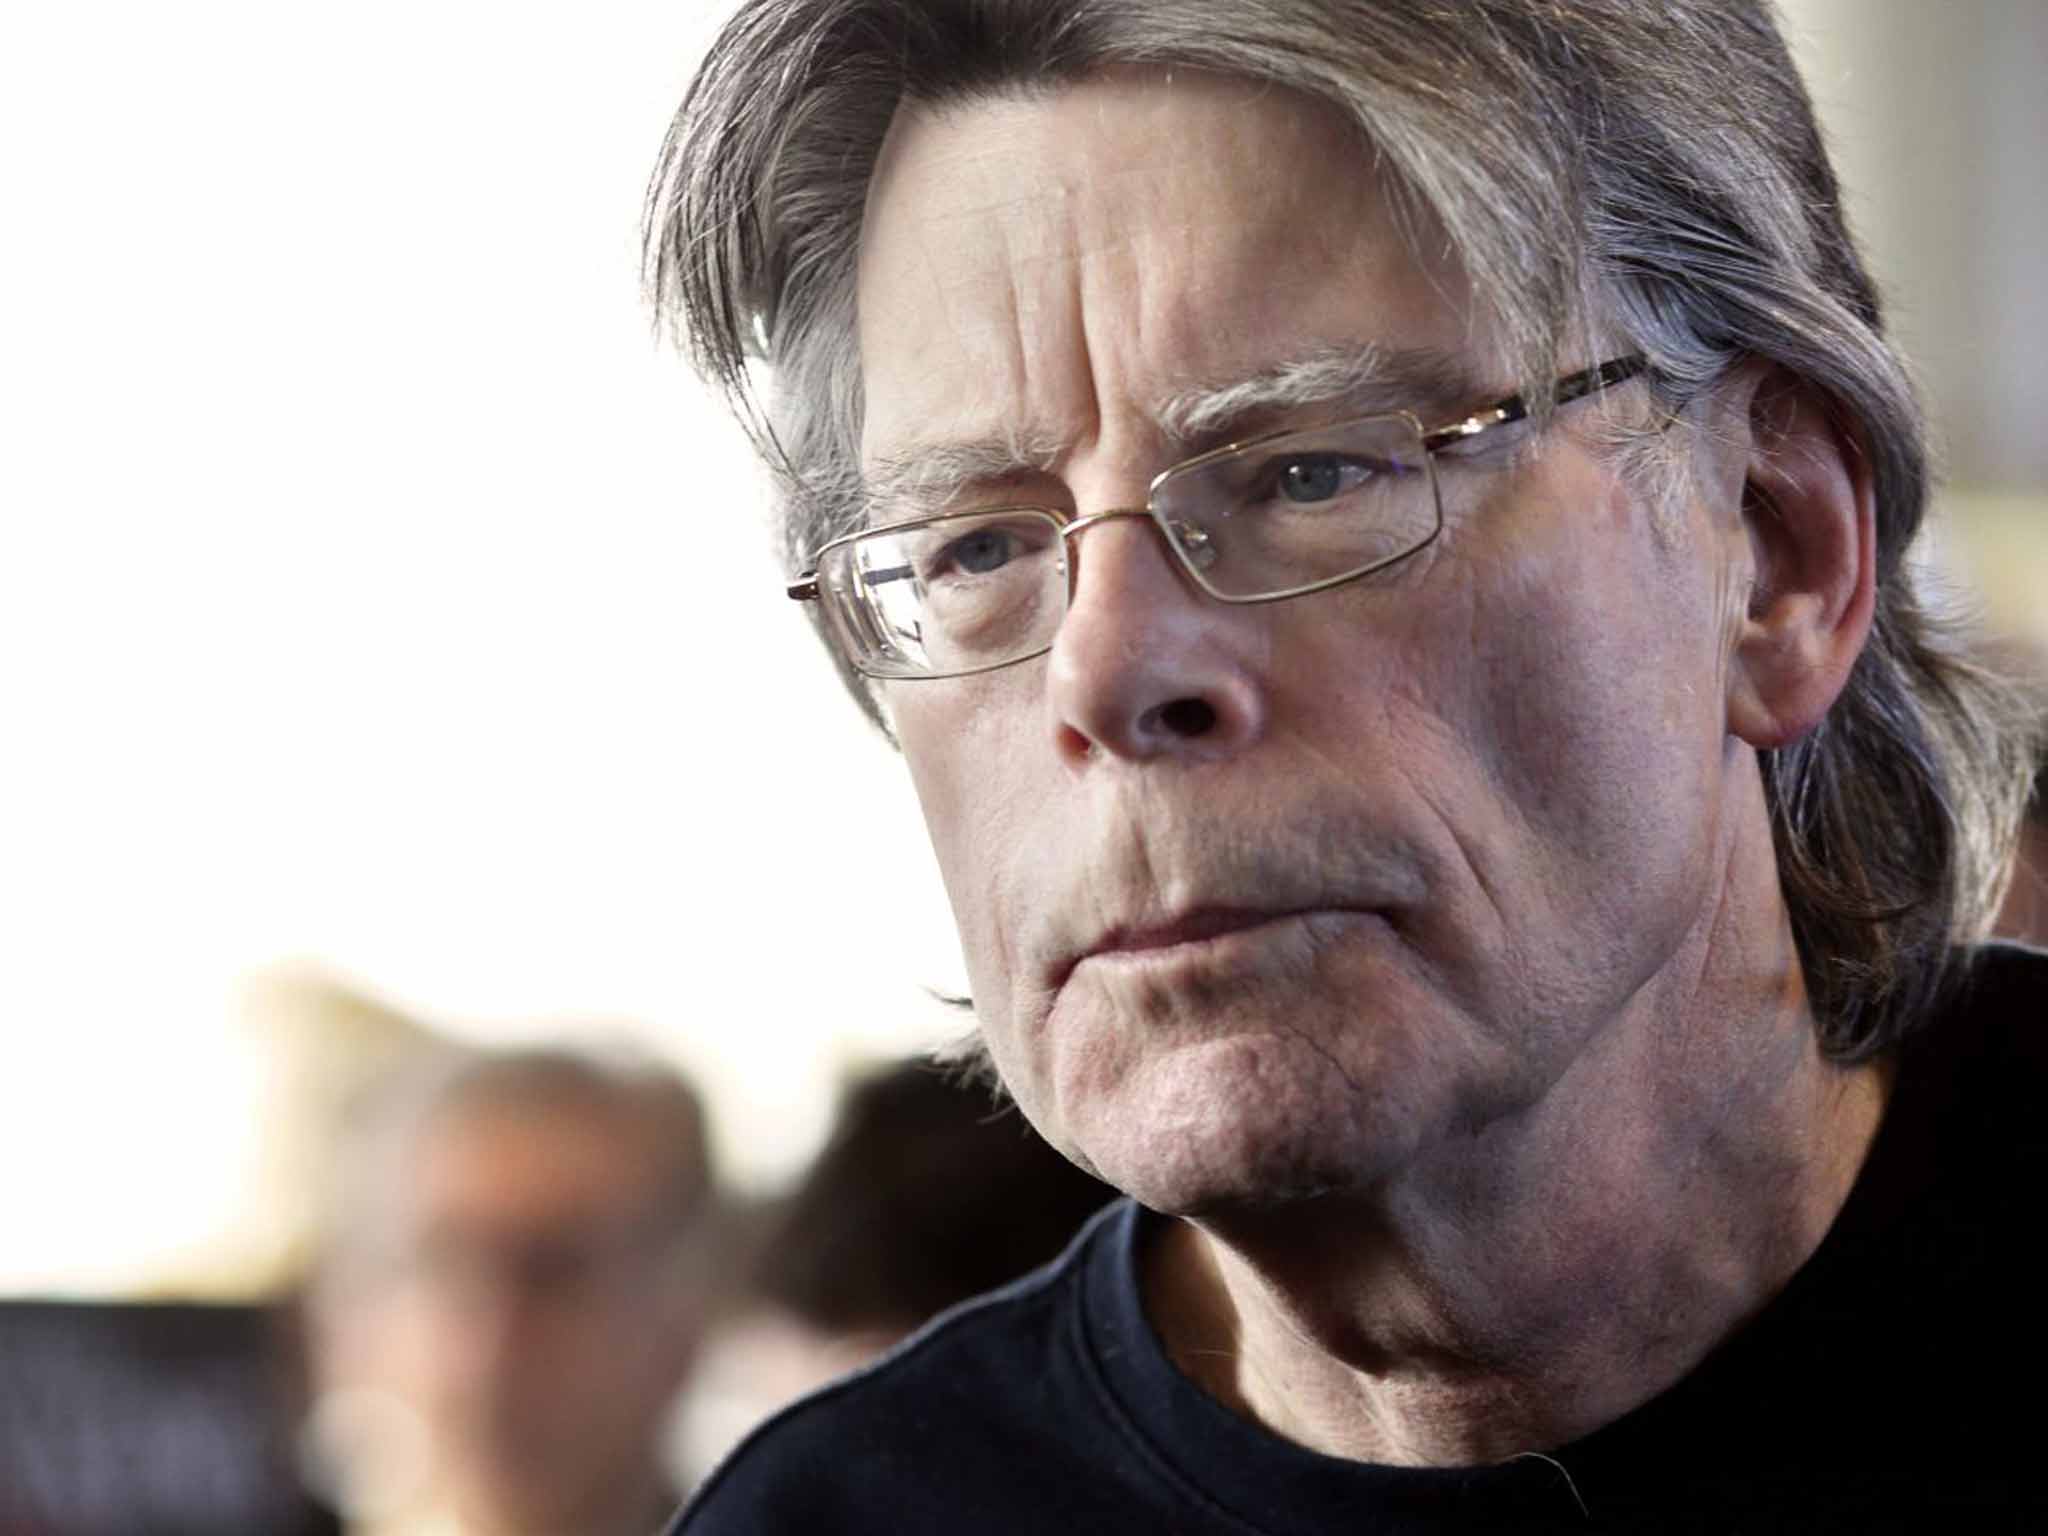 Stephen King paid tribute to fellow author Lee Child